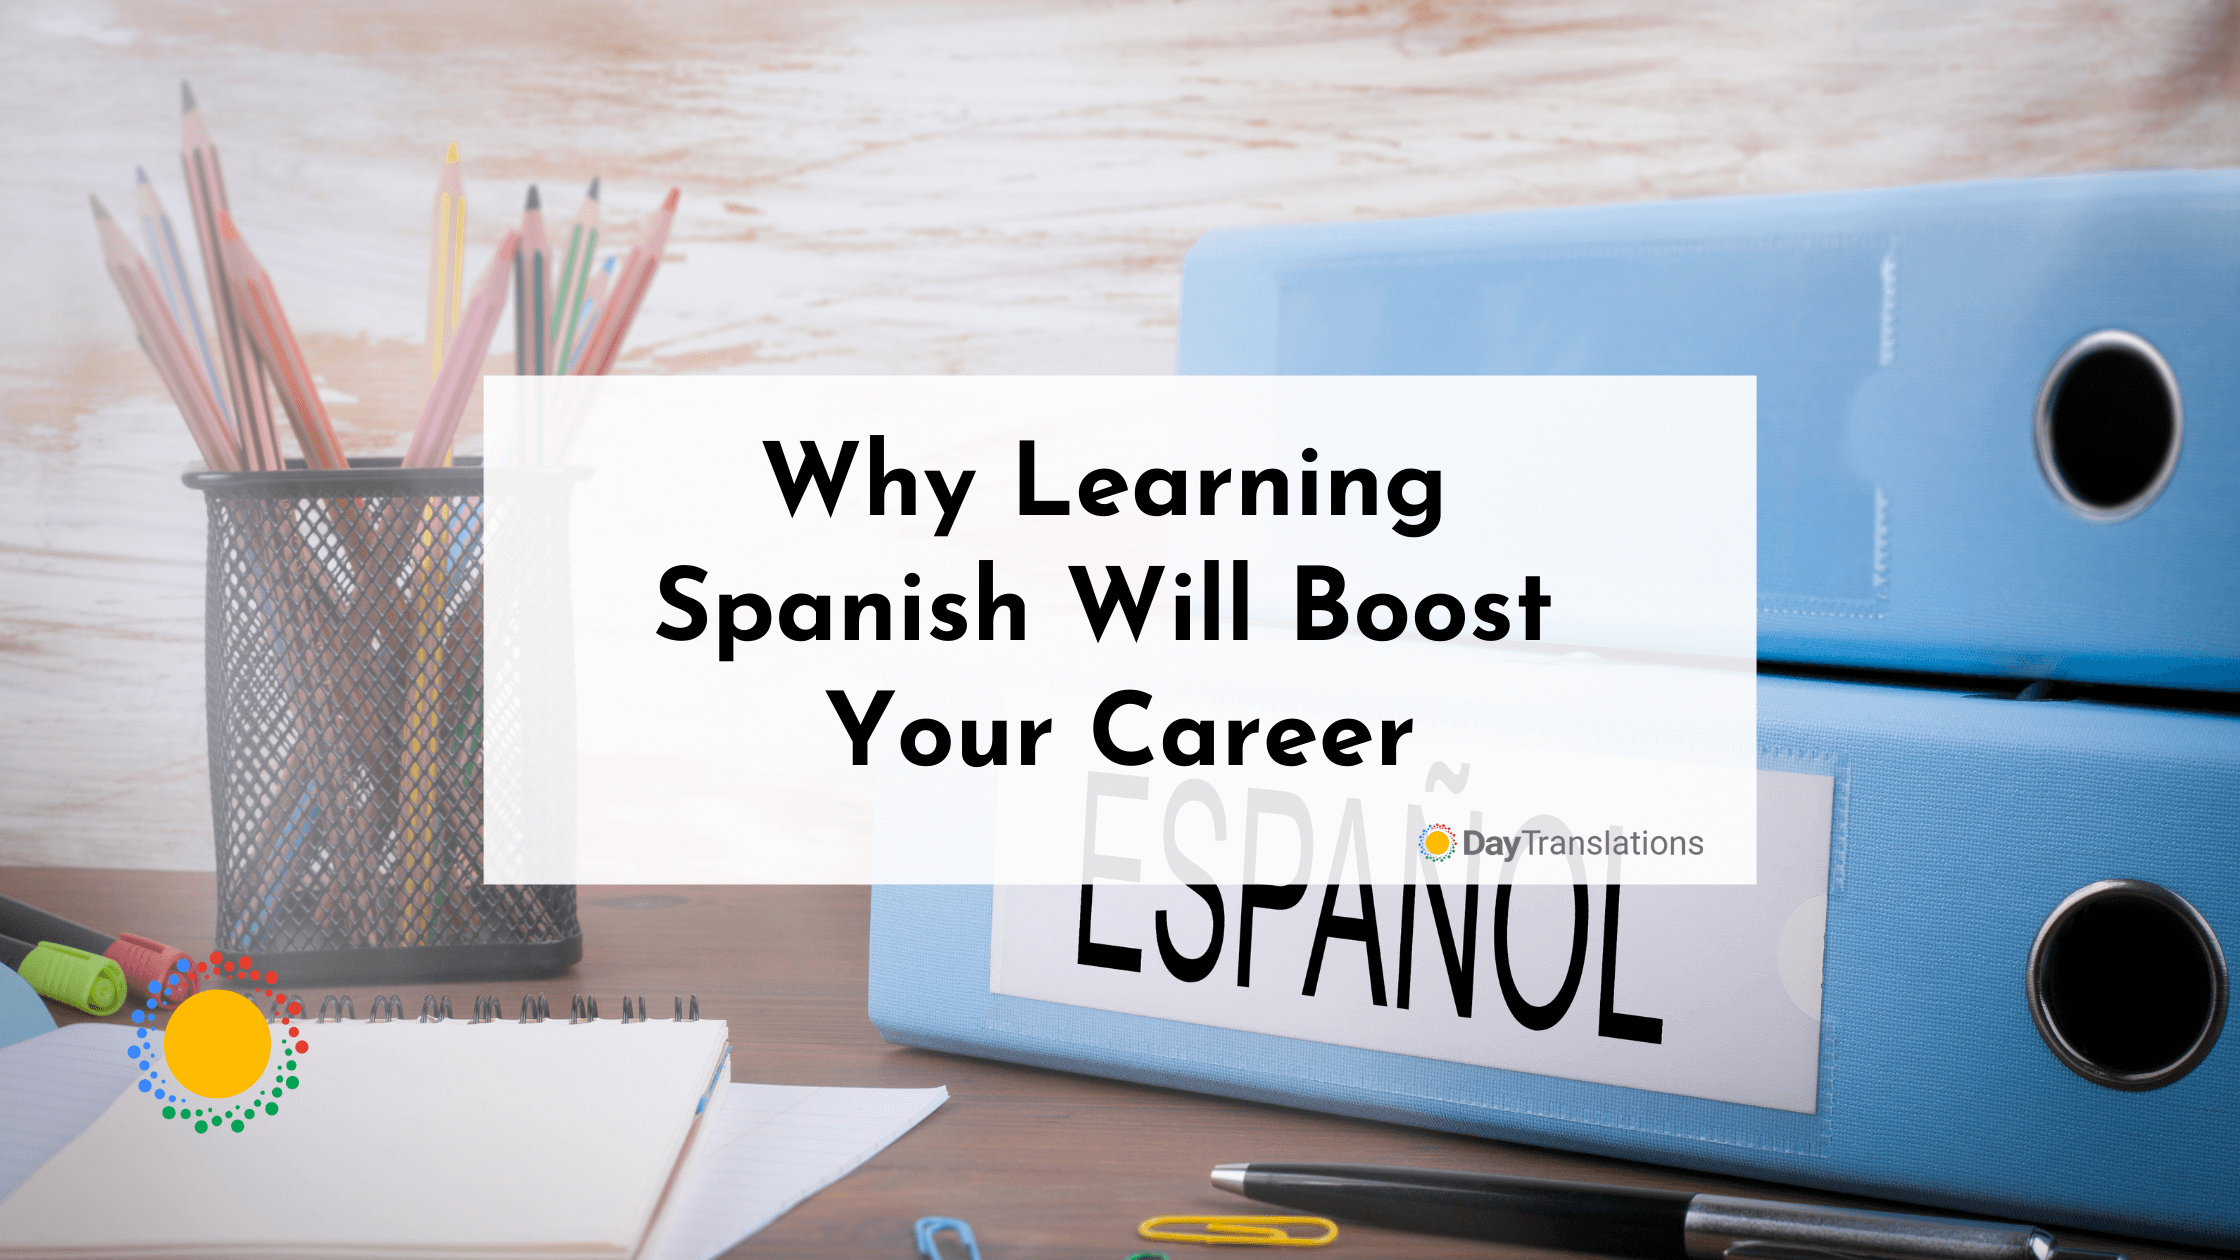 Why Learning Spanish Will Boost Your Career